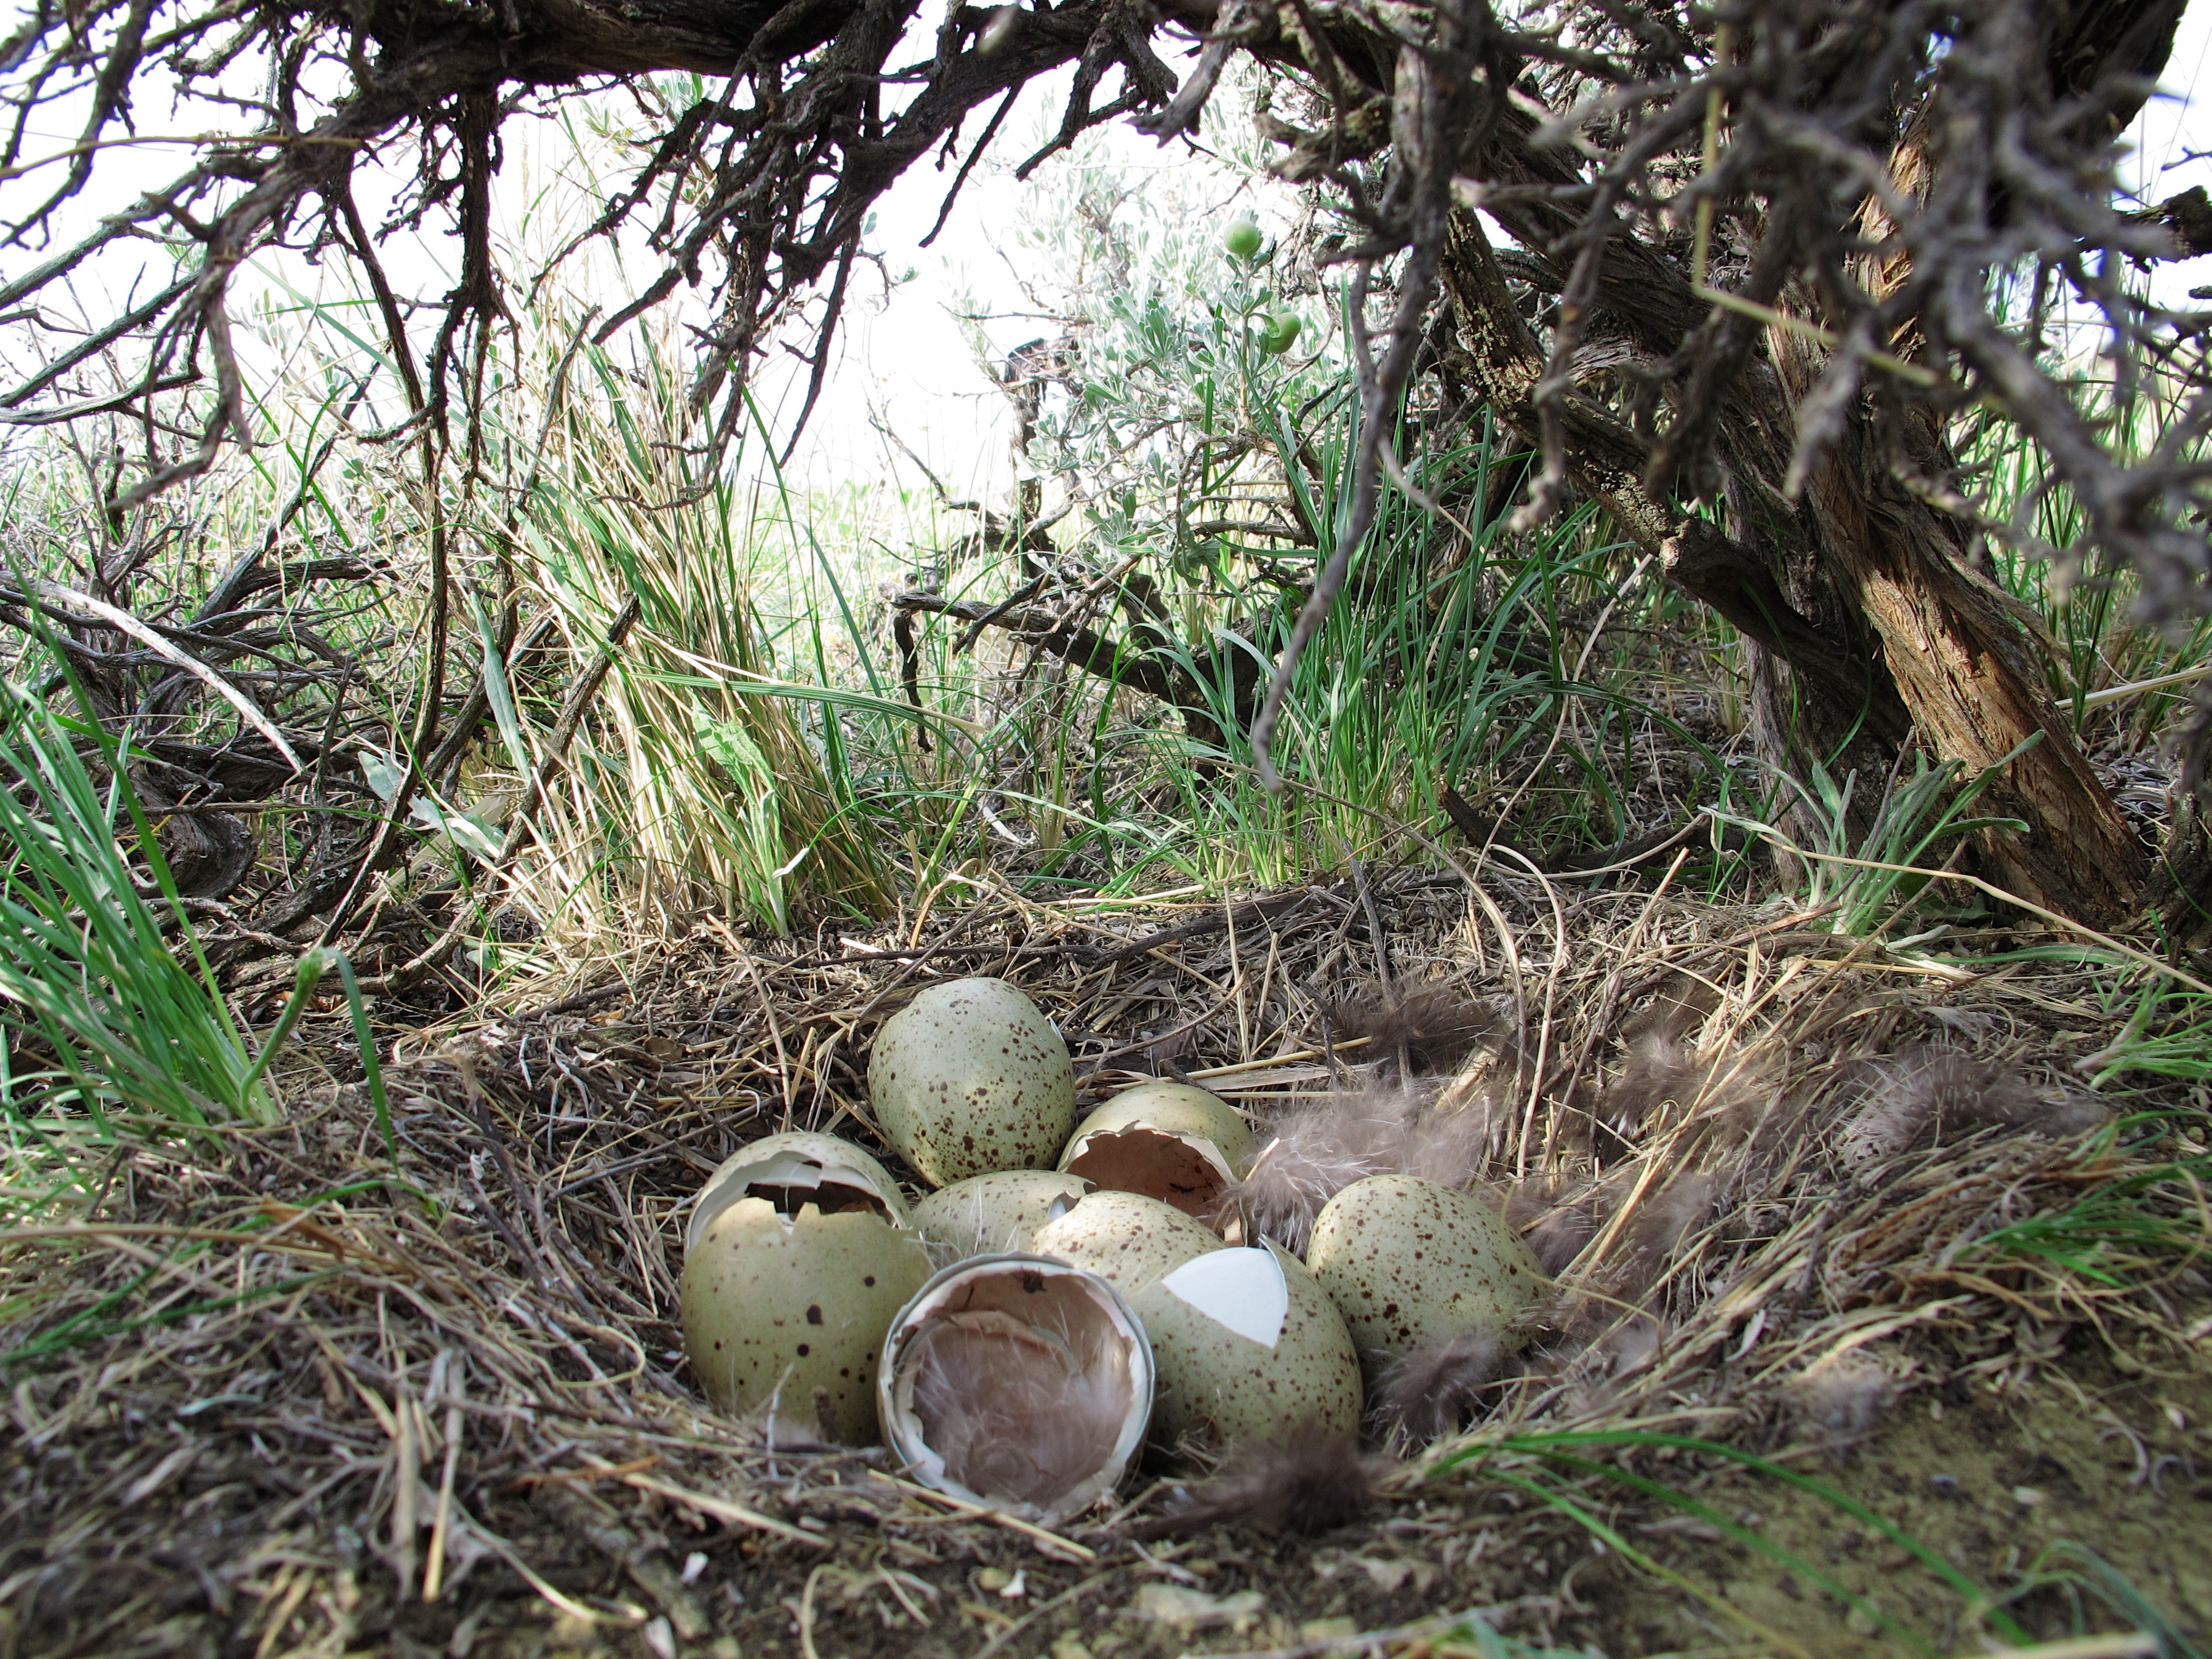 Sage grouse chicks hatch in ground nests about one month after hens lay eggs. Photo: Joe Smith